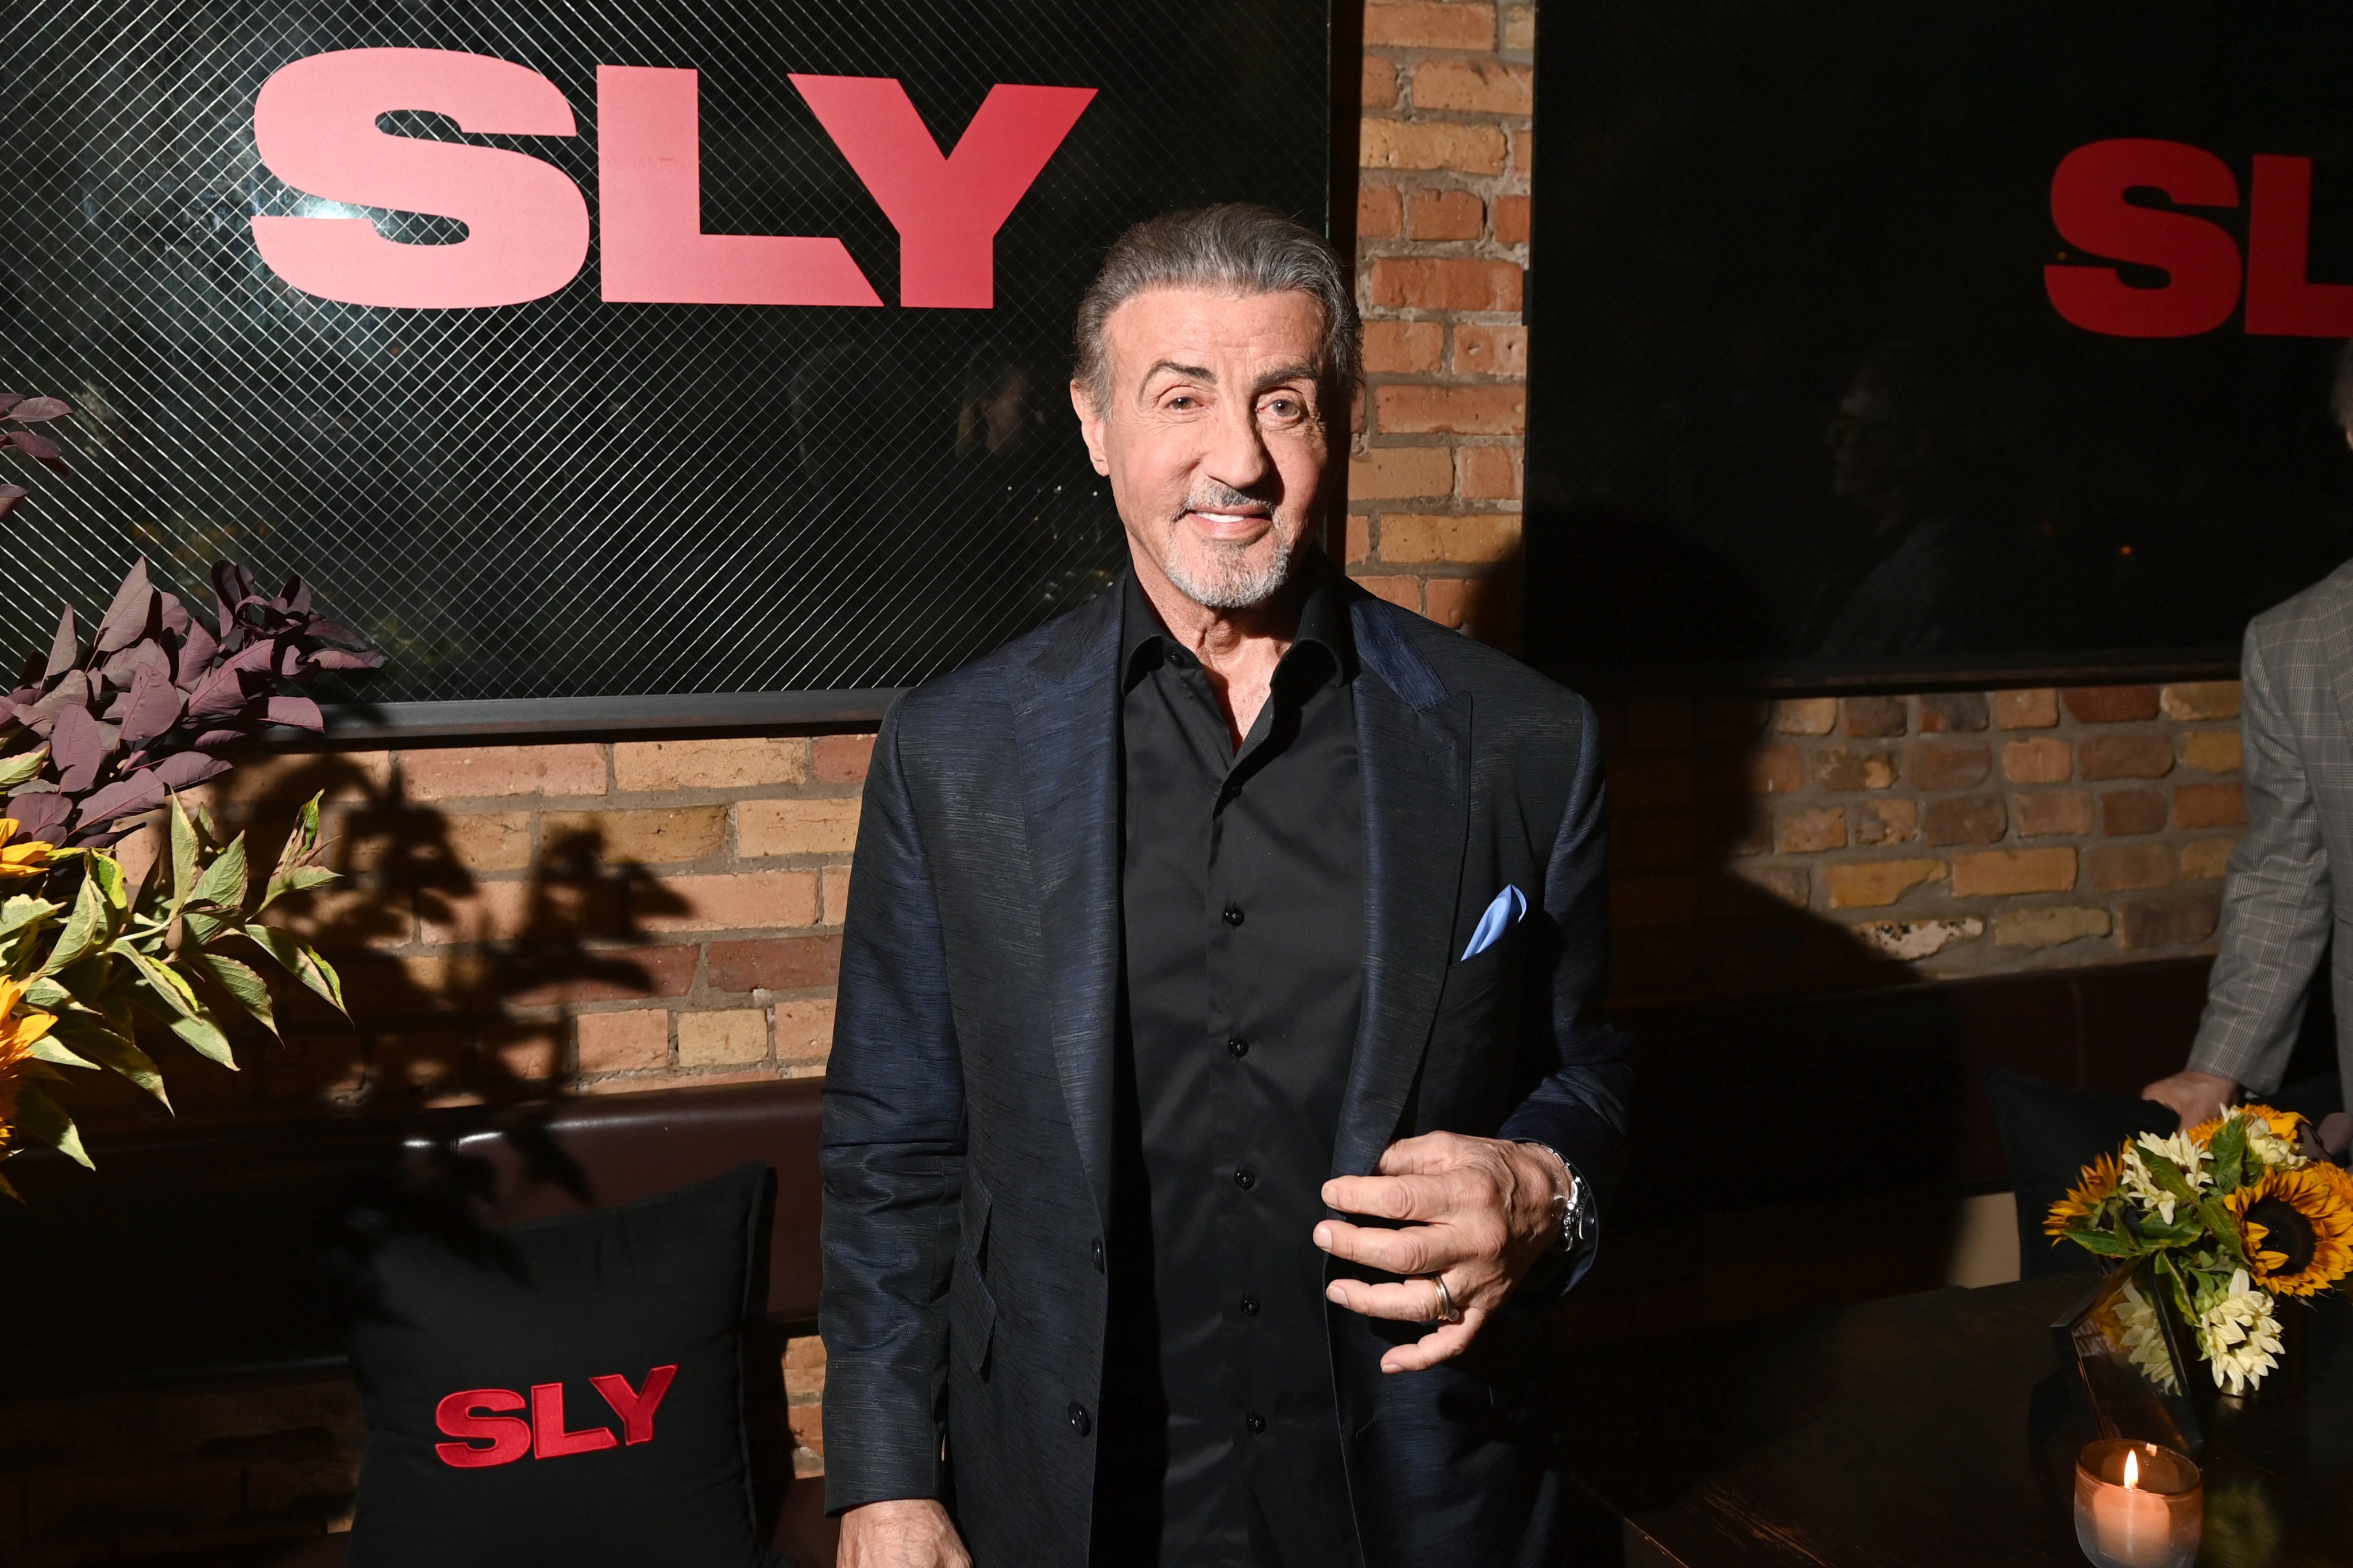 Hollywood star Sylvester Stallone has a new Netflix documentary titled Sly. Photo: Getty Images